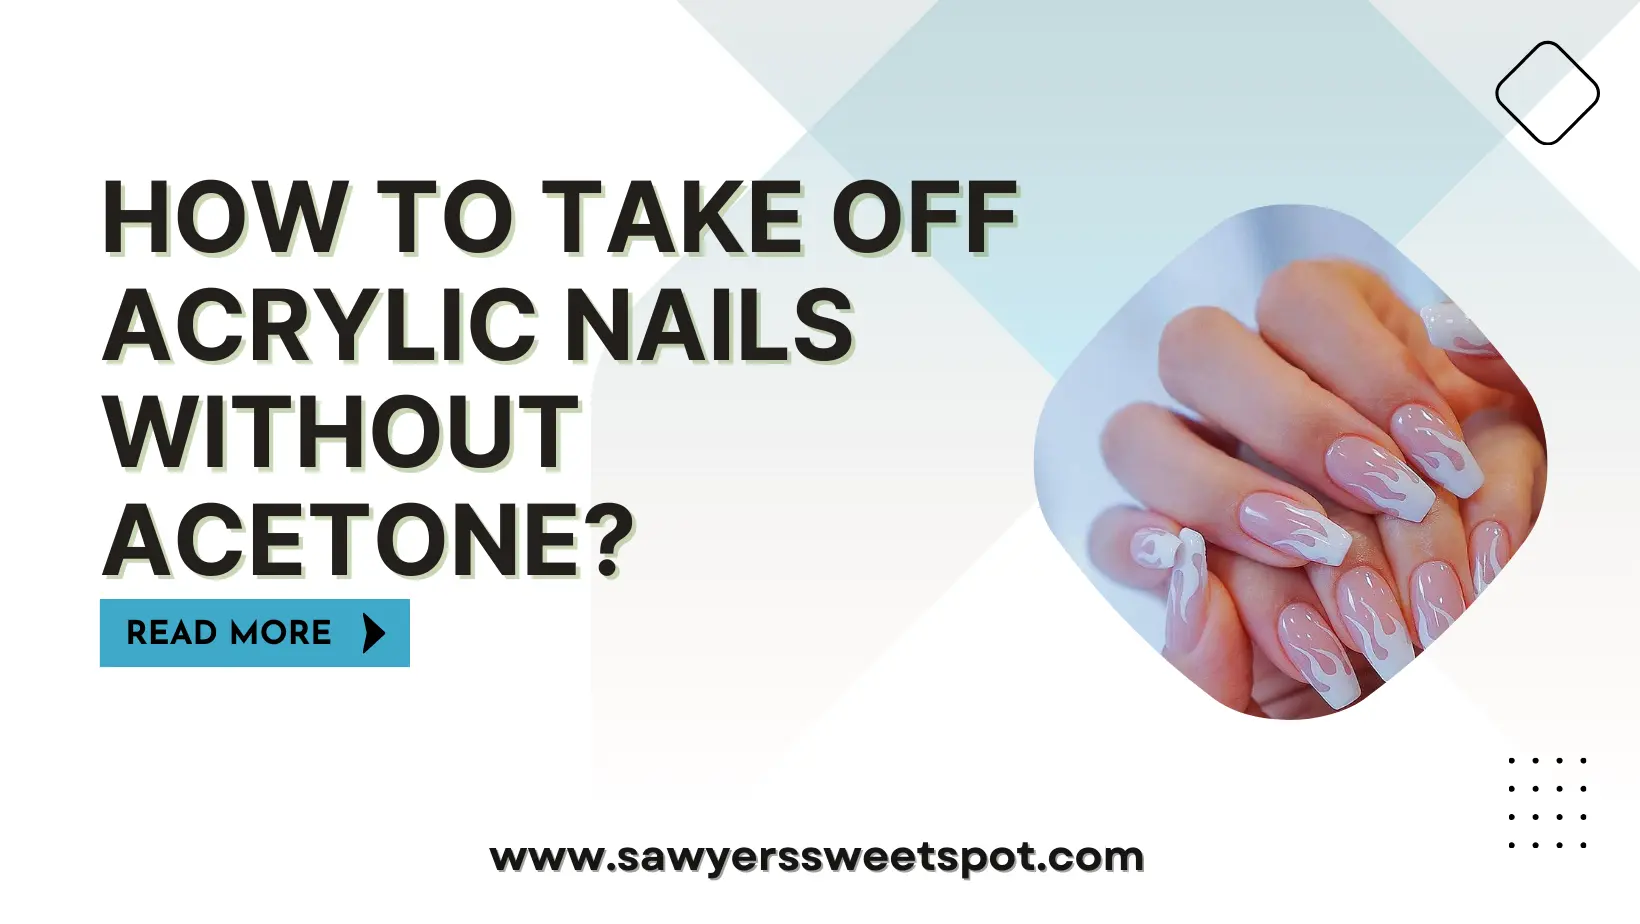 How to Take Off Acrylic Nails Without Acetone?